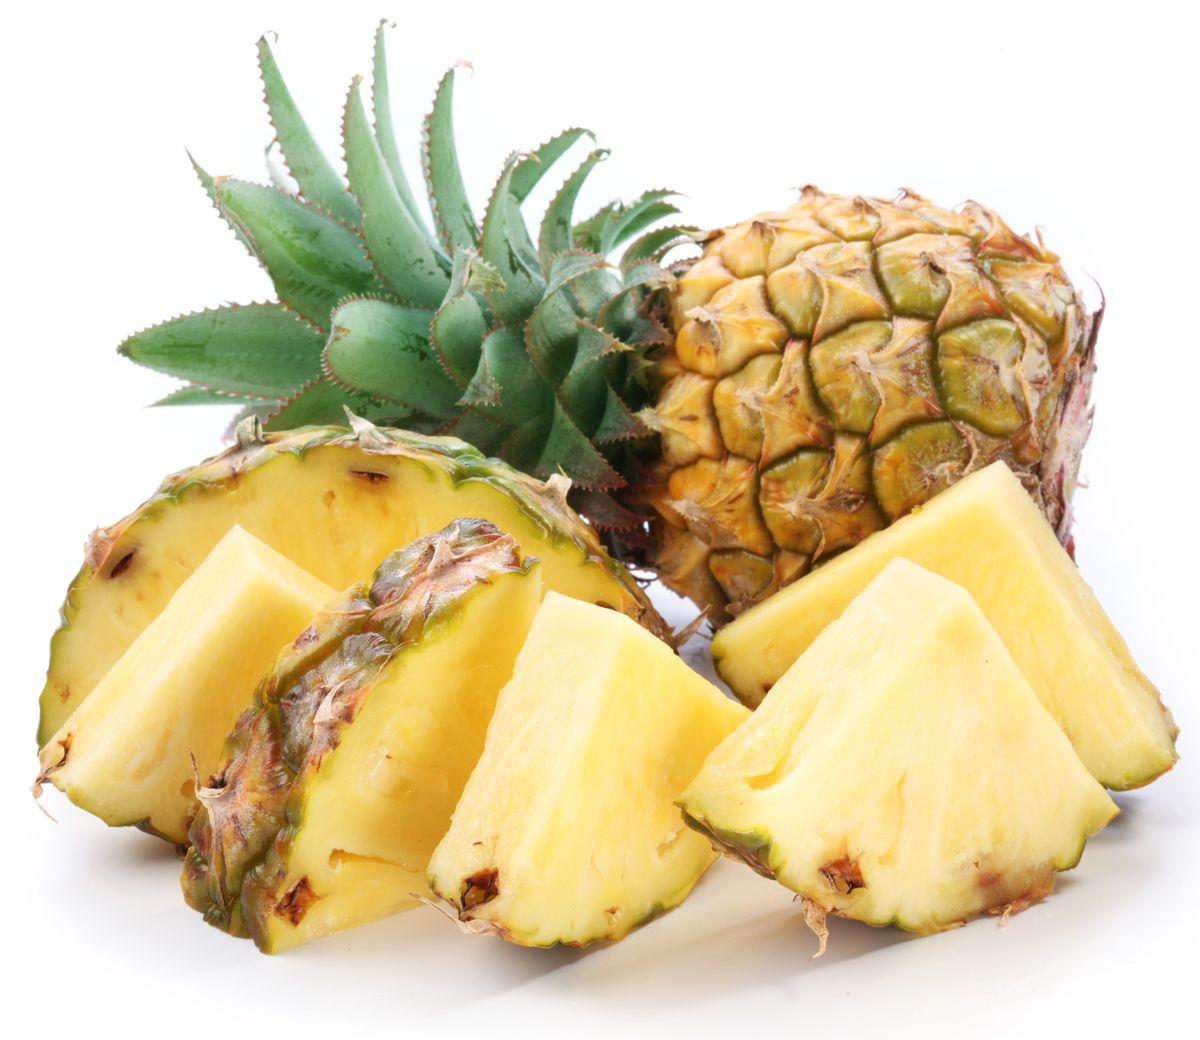 a-case-of-pineapple